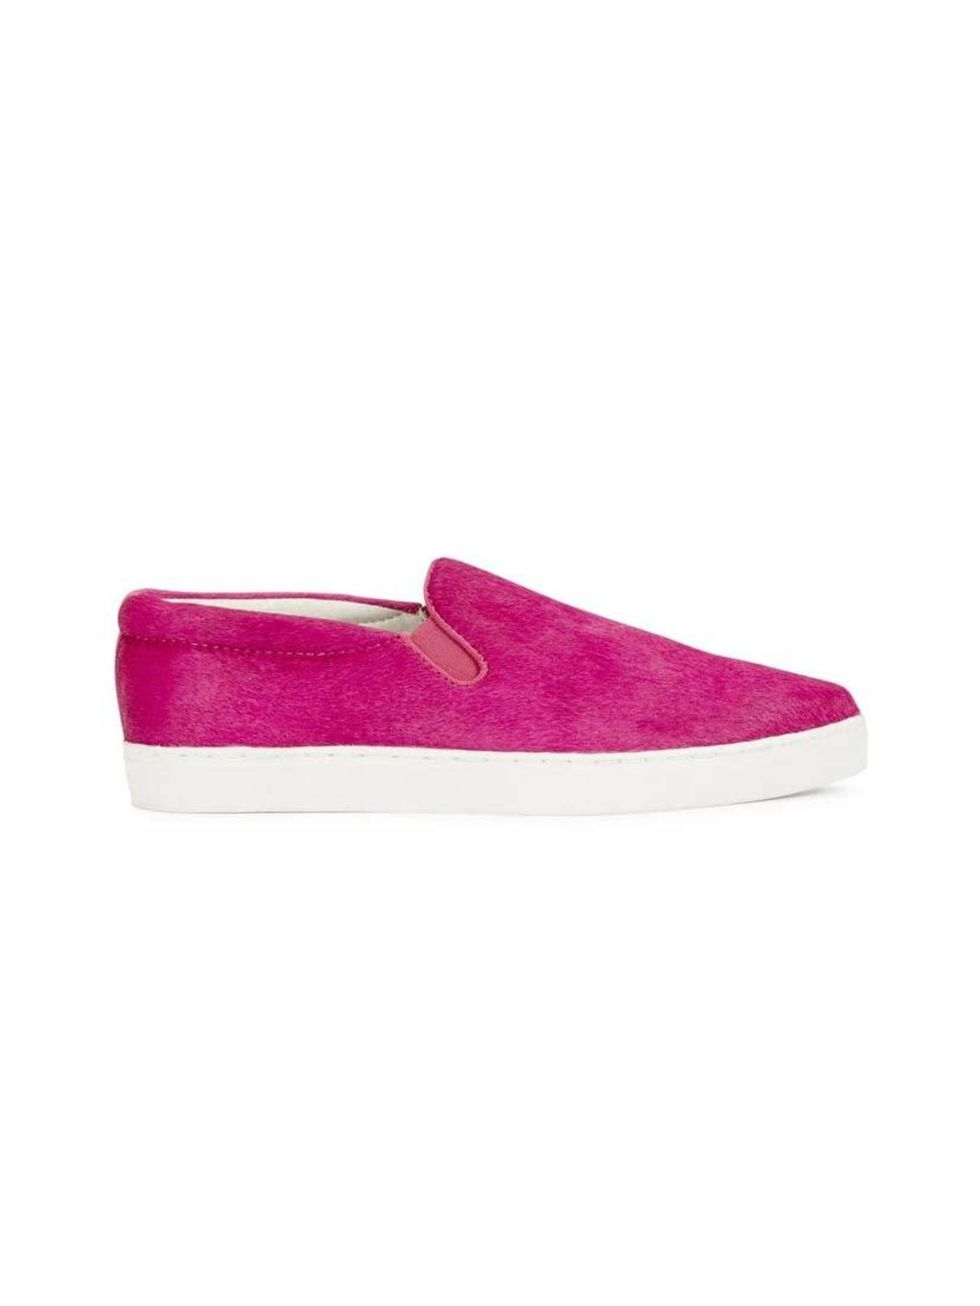 <p>Add a splash of colour to your weekend wardrobe.</p>

<p> </p>

<p>Senso slip-ons, £155 at <a href="http://www.harveynichols.com/100456-dylan-pink-calf-hair-skate-shoes/" target="_blank">Harvey Nichols</a></p>